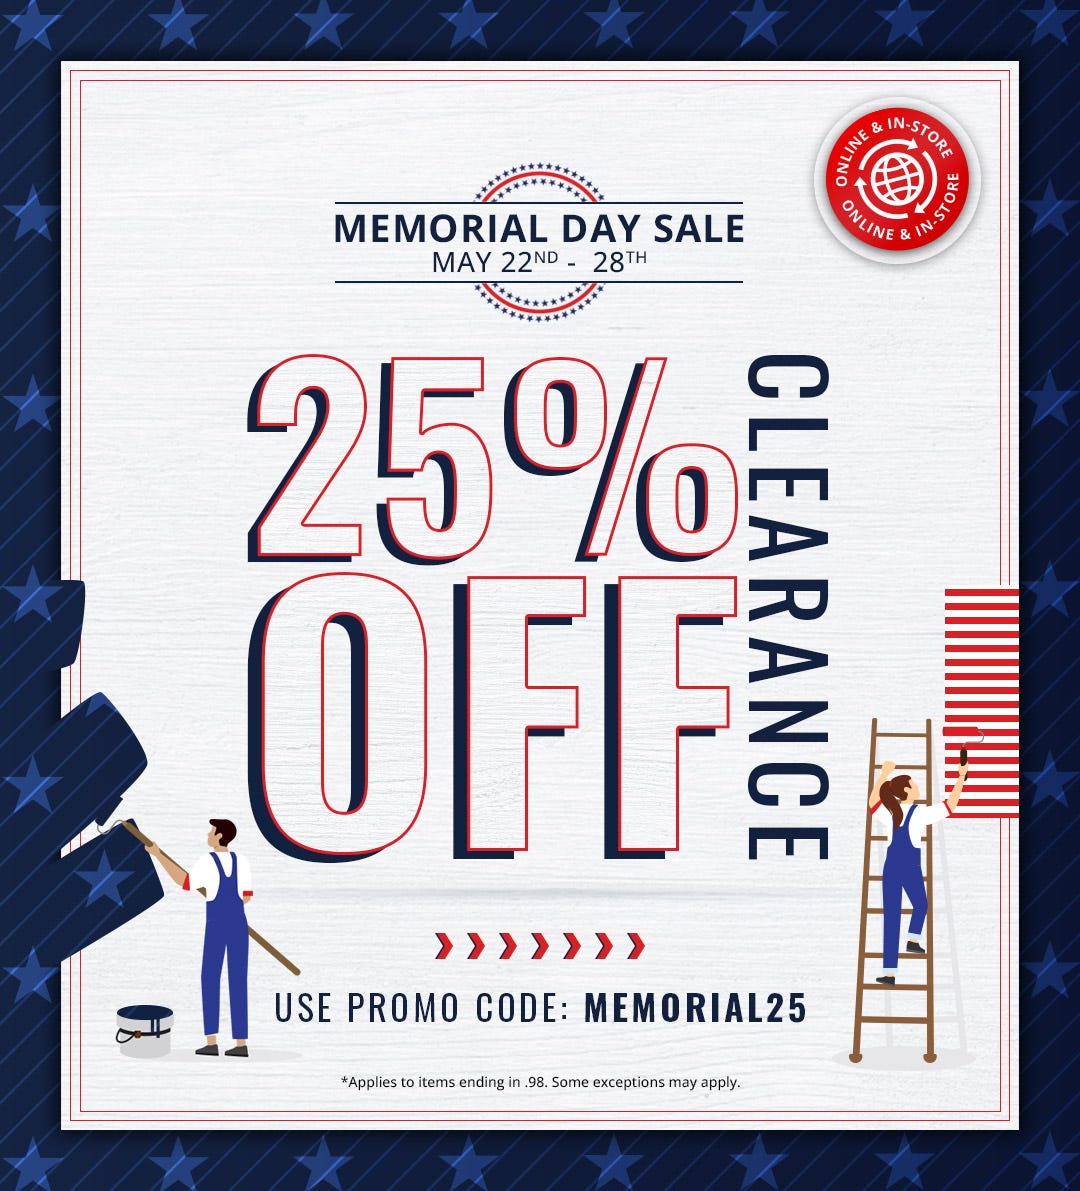 Memorial Day Sale: 25% off clearance